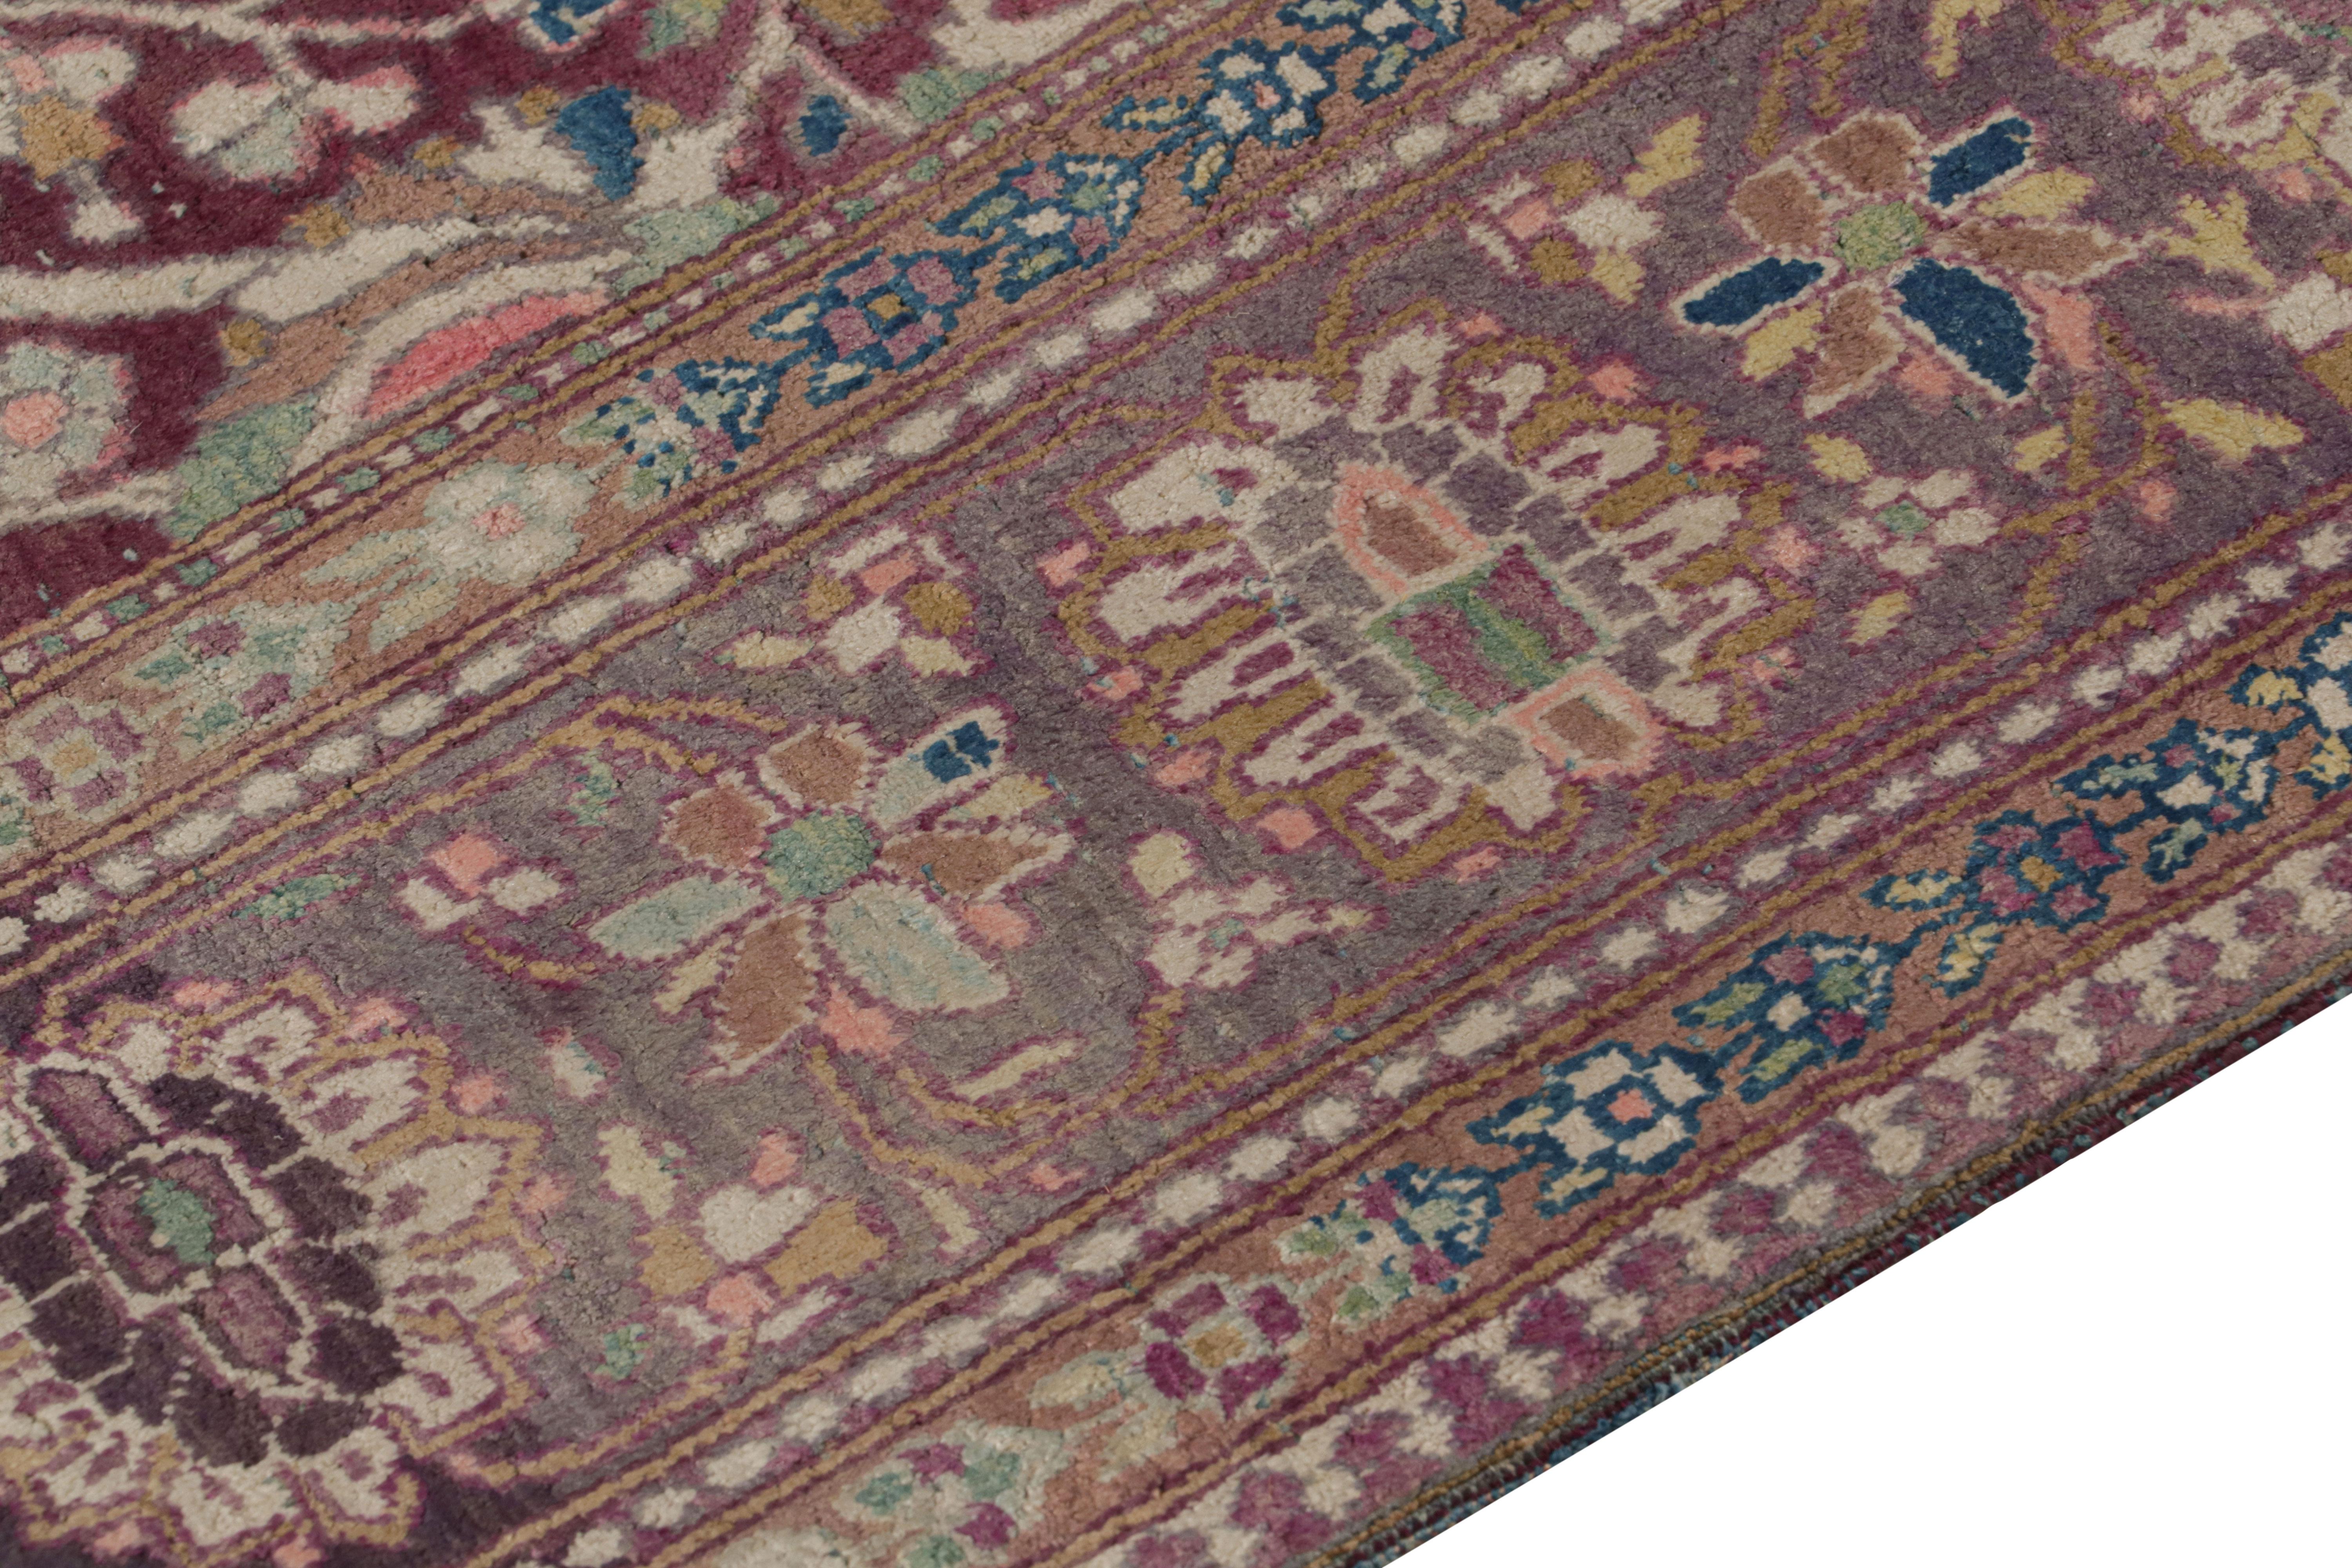 Silk Antique Persian Kashan Rug with Medallion and Floral Patterns, from Rug & Kilim For Sale